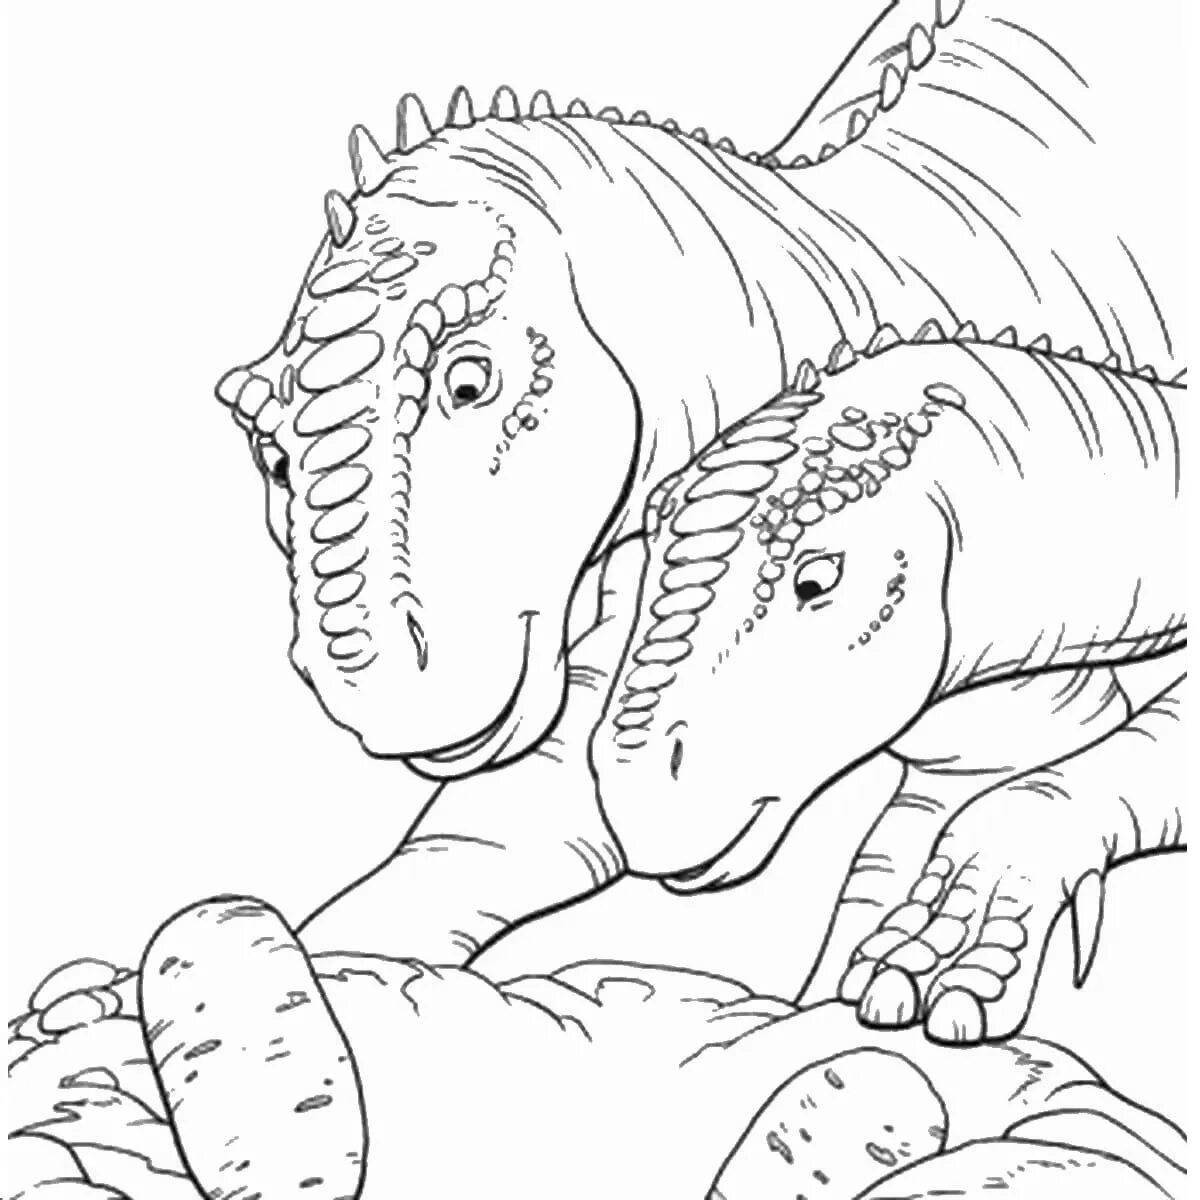 Jurassic park dinosaurs majestic coloring book